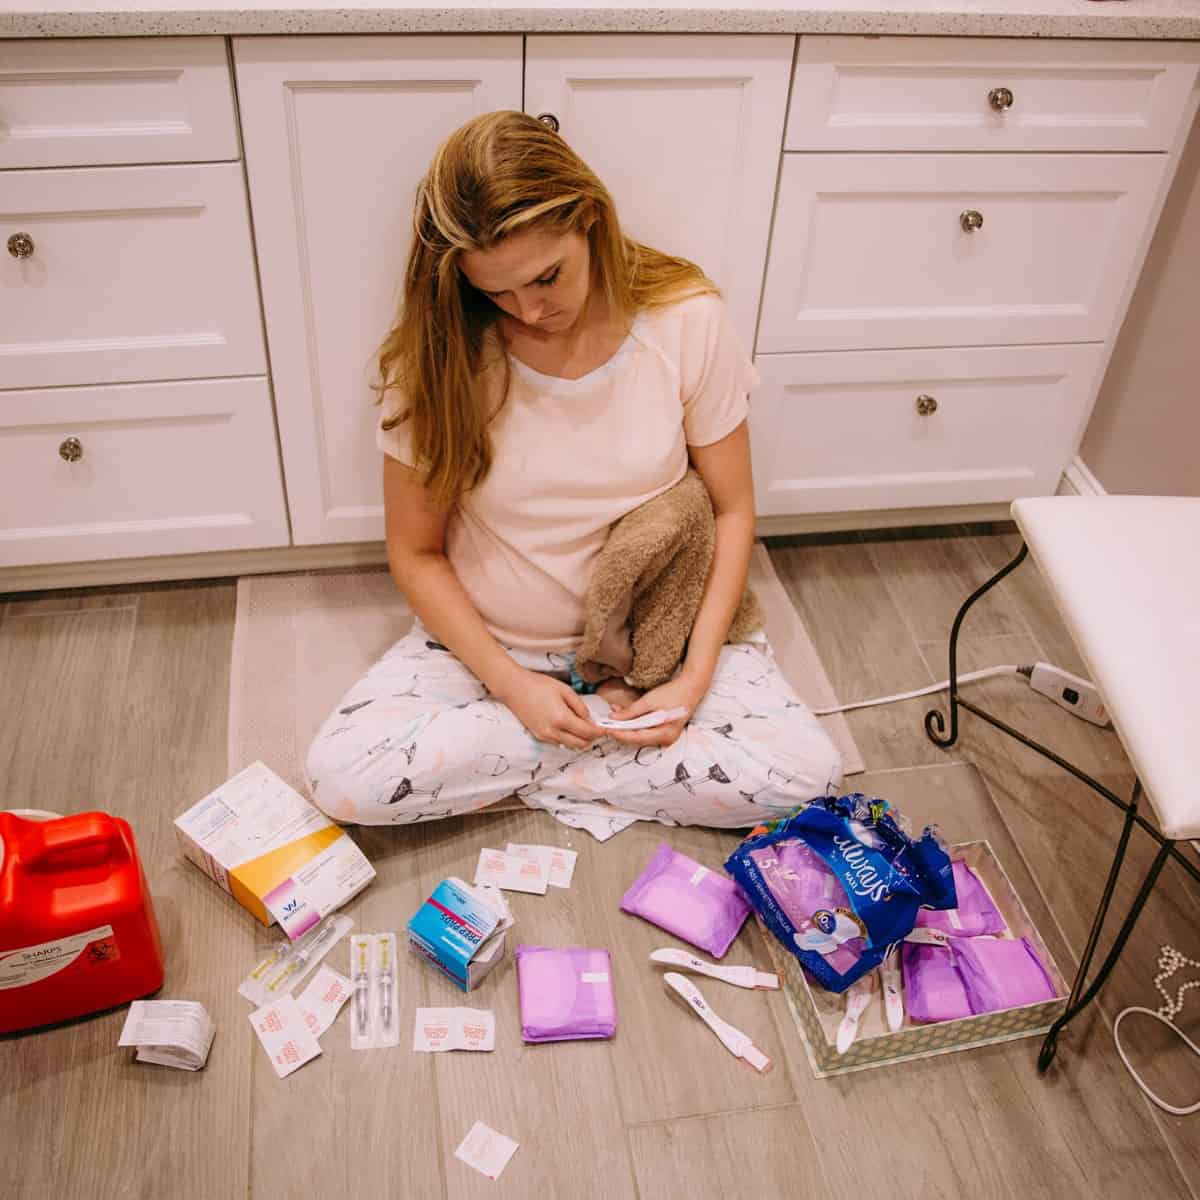 woman-on-floor-mourning-miscarriage-with-various-supplies-around-her